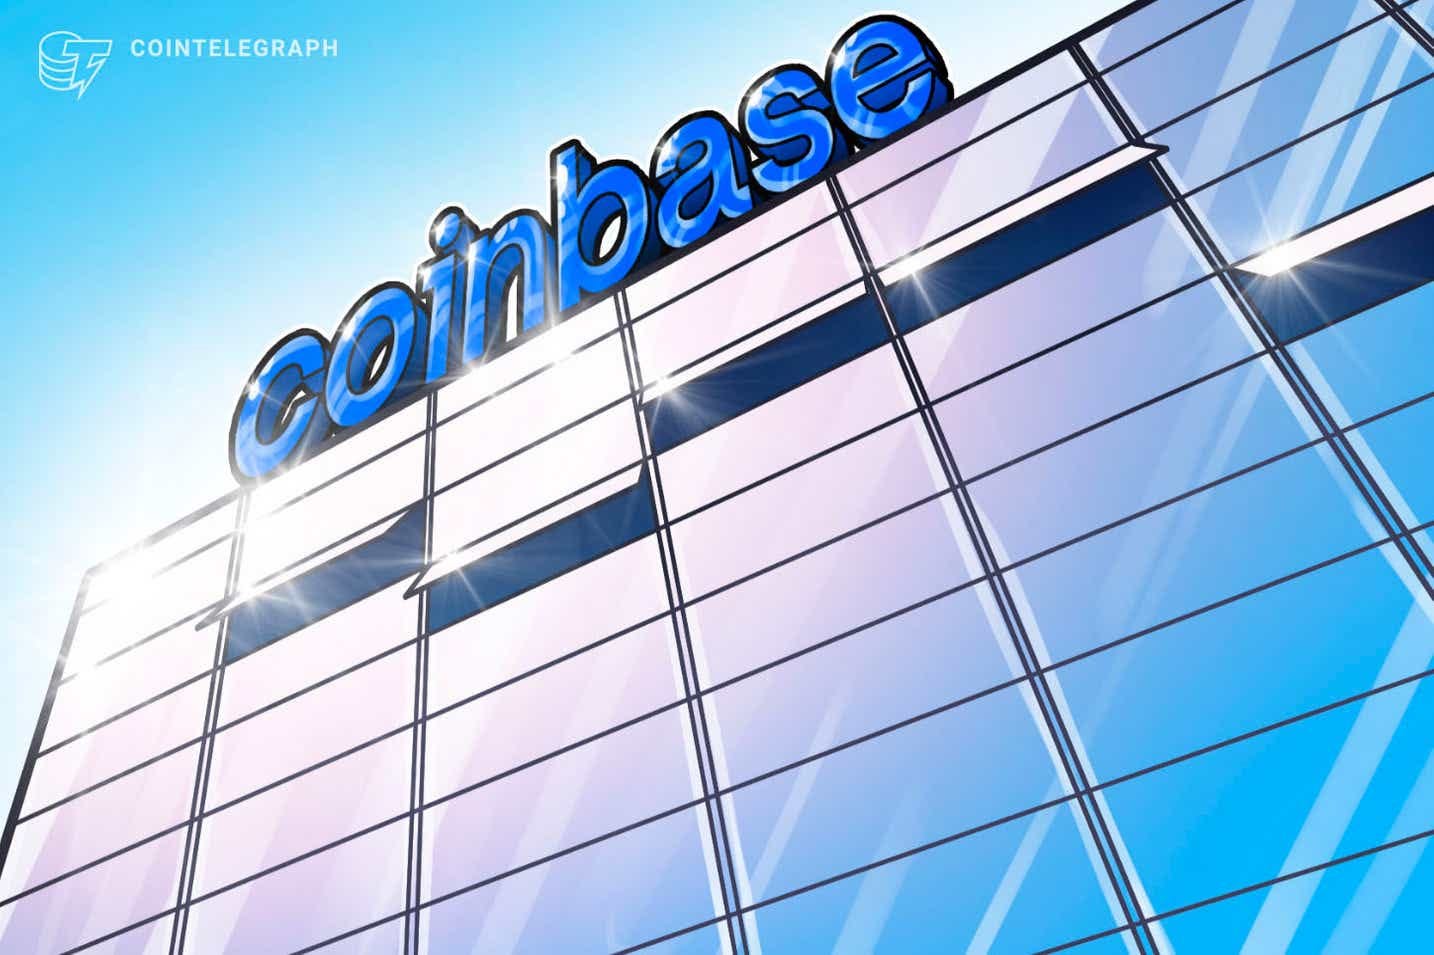 Coinbase announces ‘nearly the entire company will shut down’ for four weeklong breaks in 2022 to allow workers to recharge